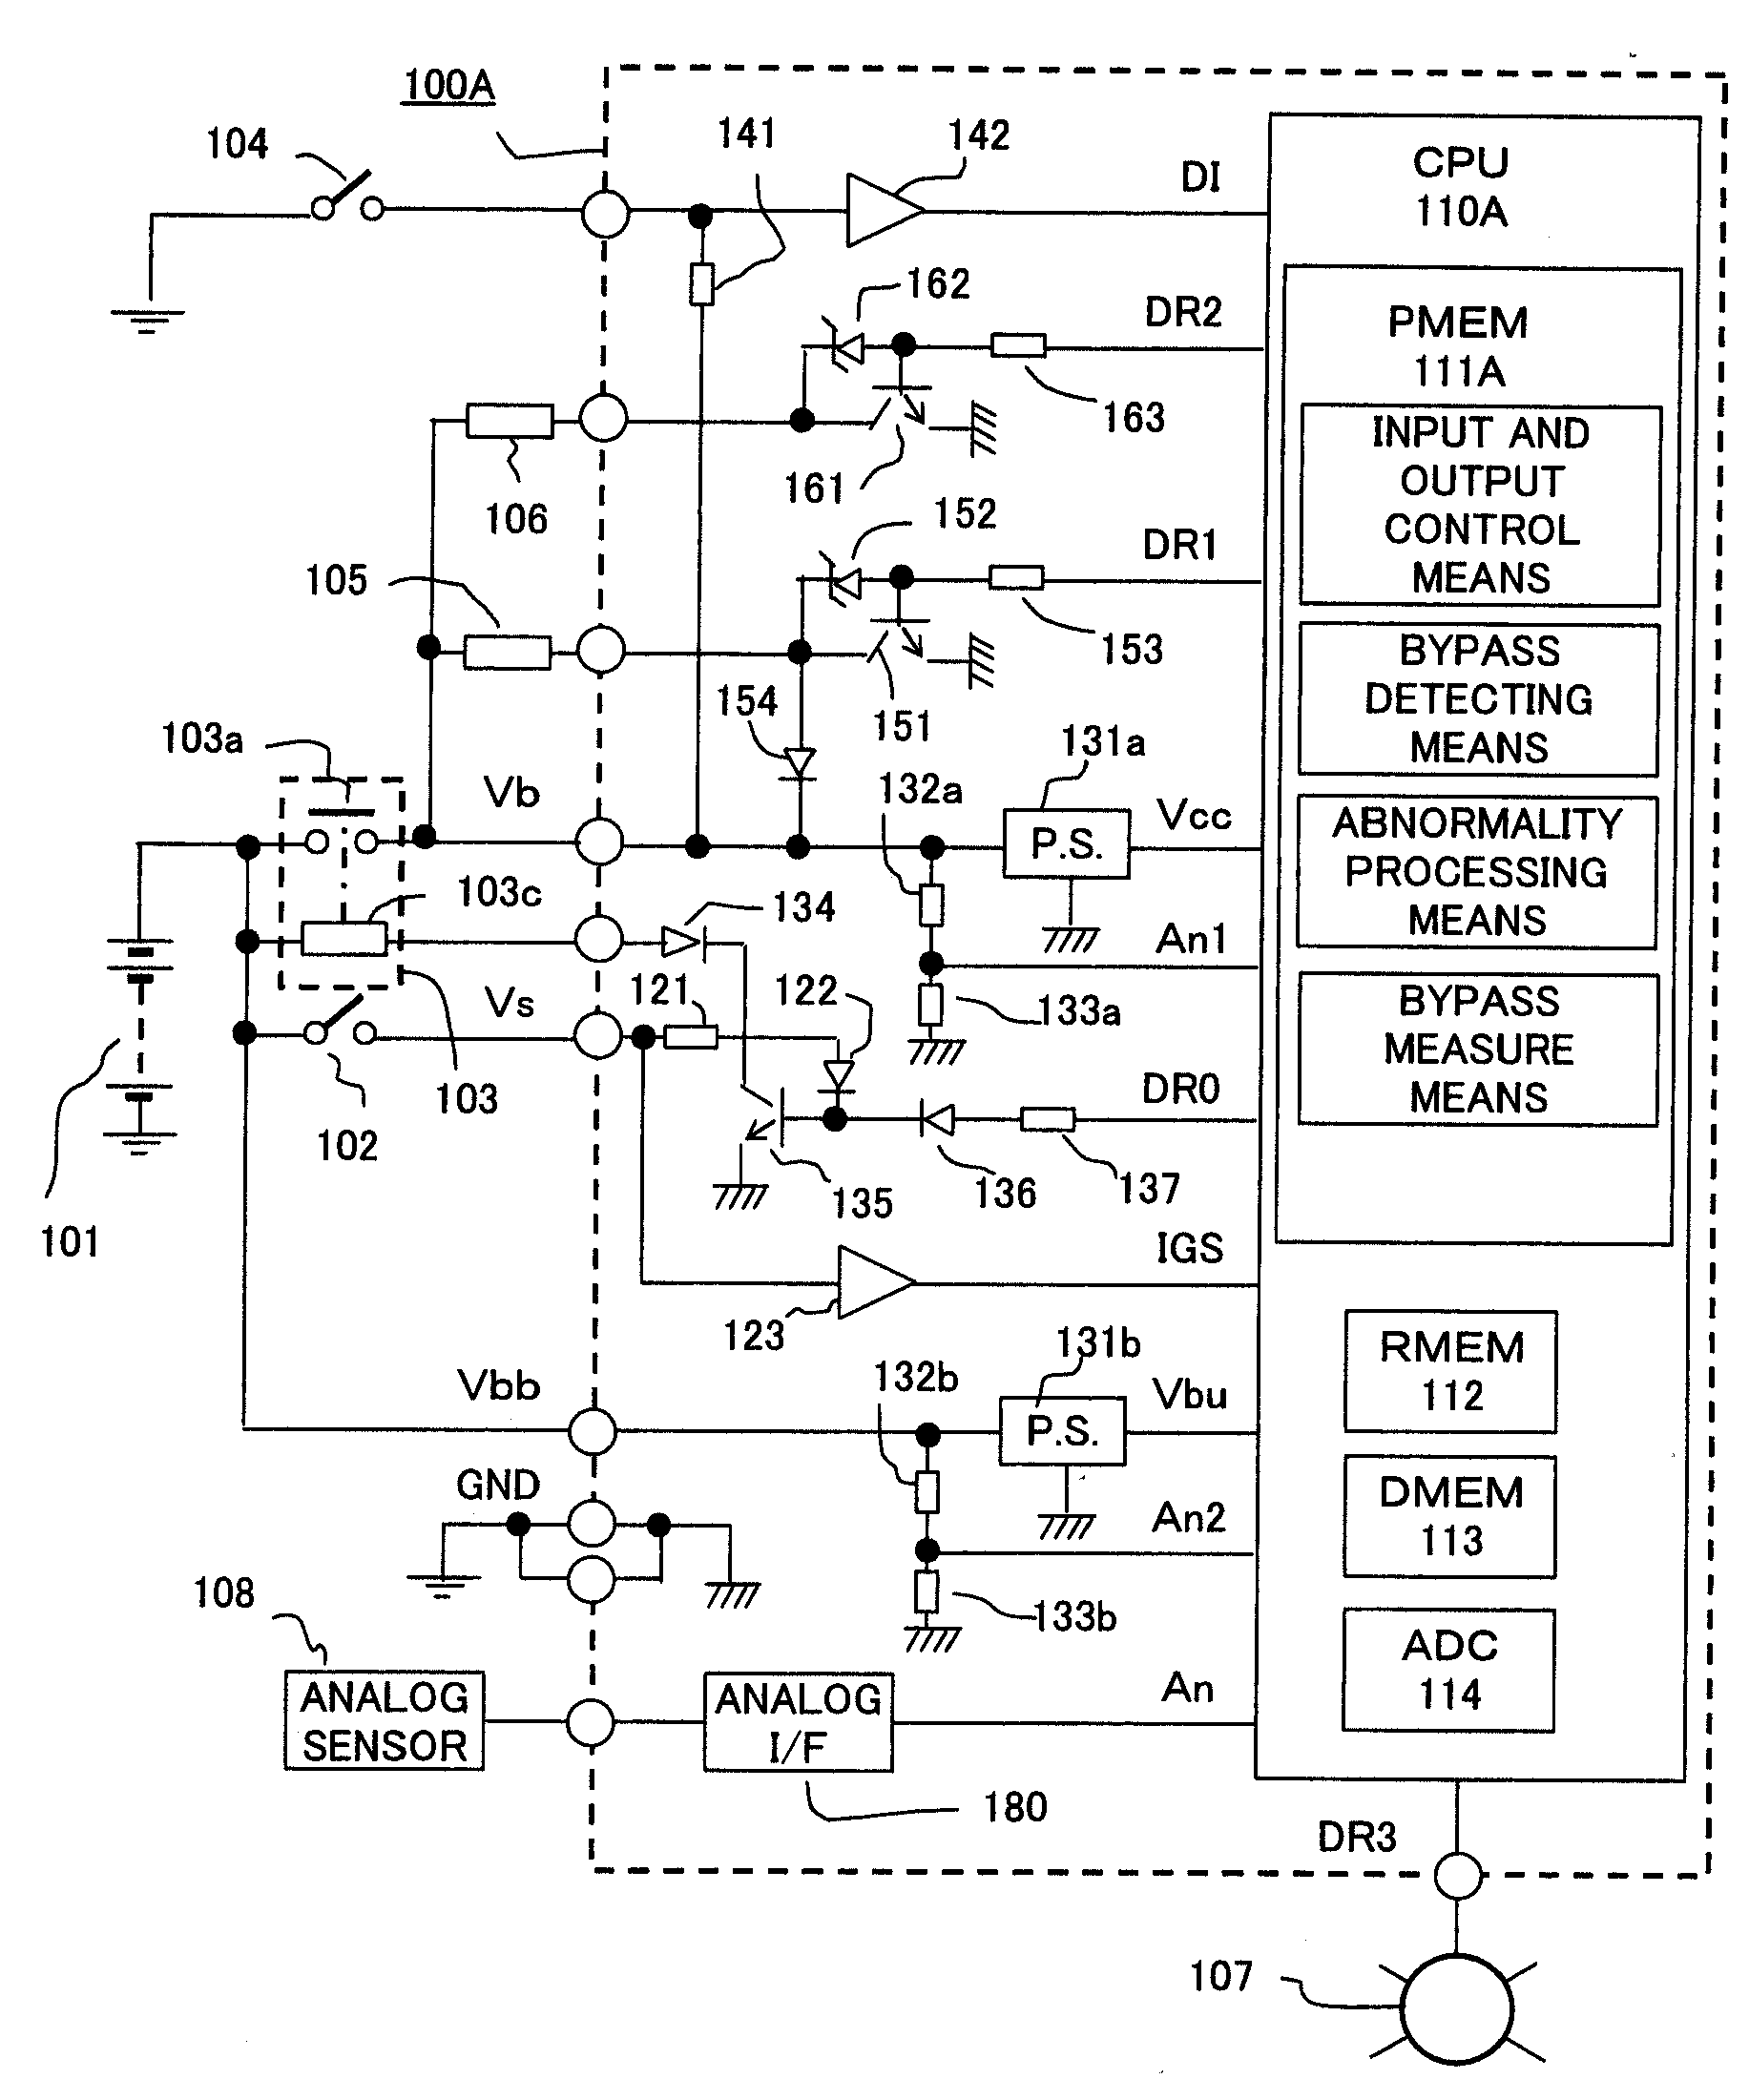 Power supply abnormality detection circuit for on-vehicle electronic control device